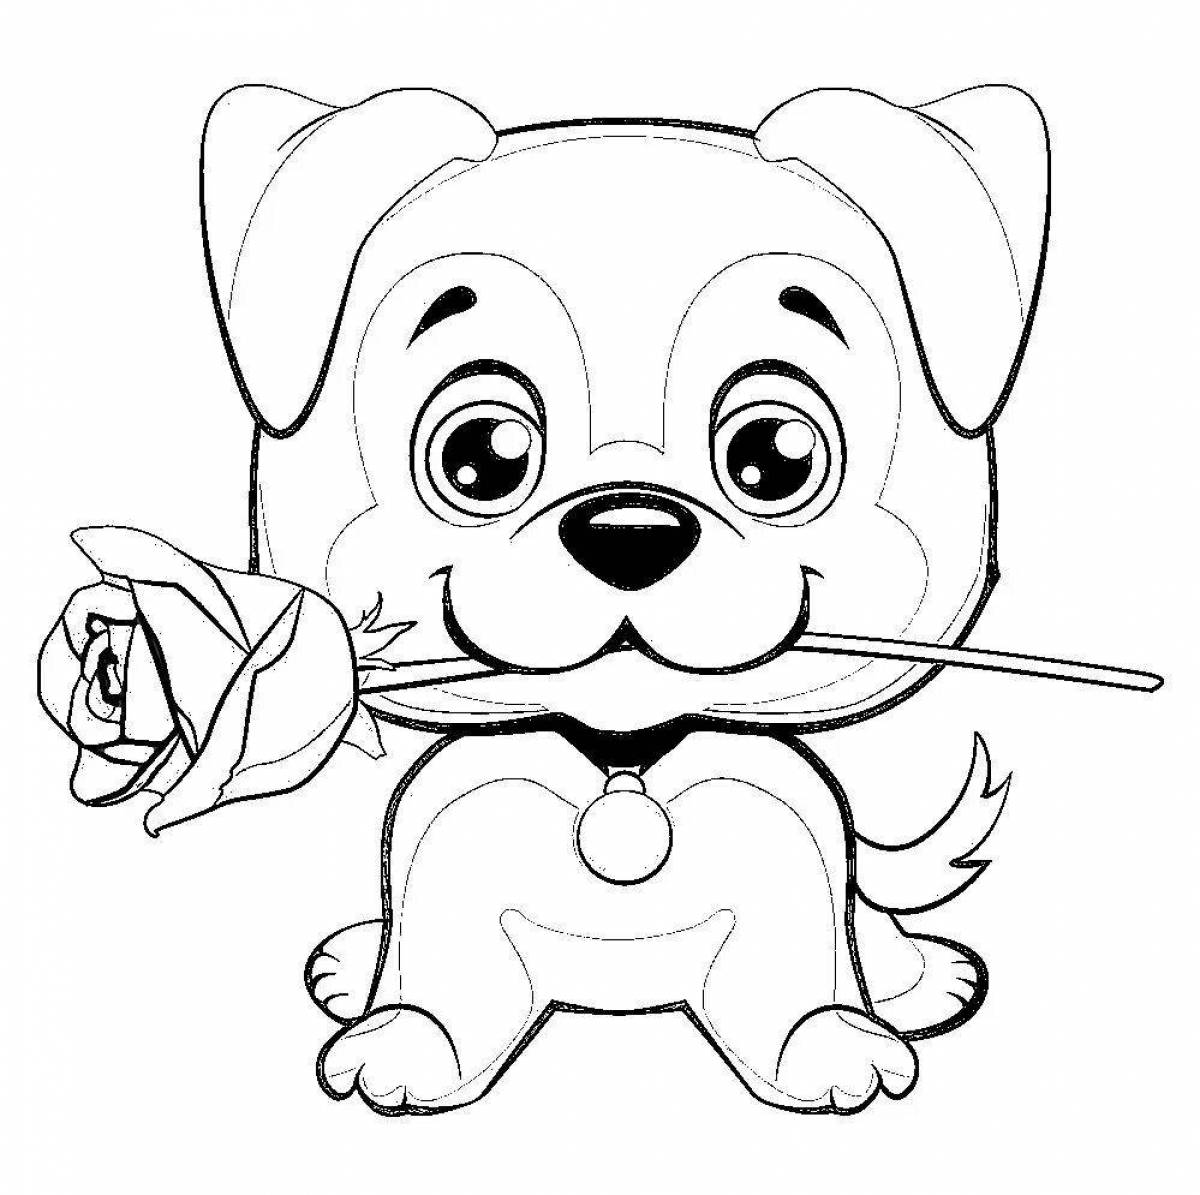 Dog with a bow #17